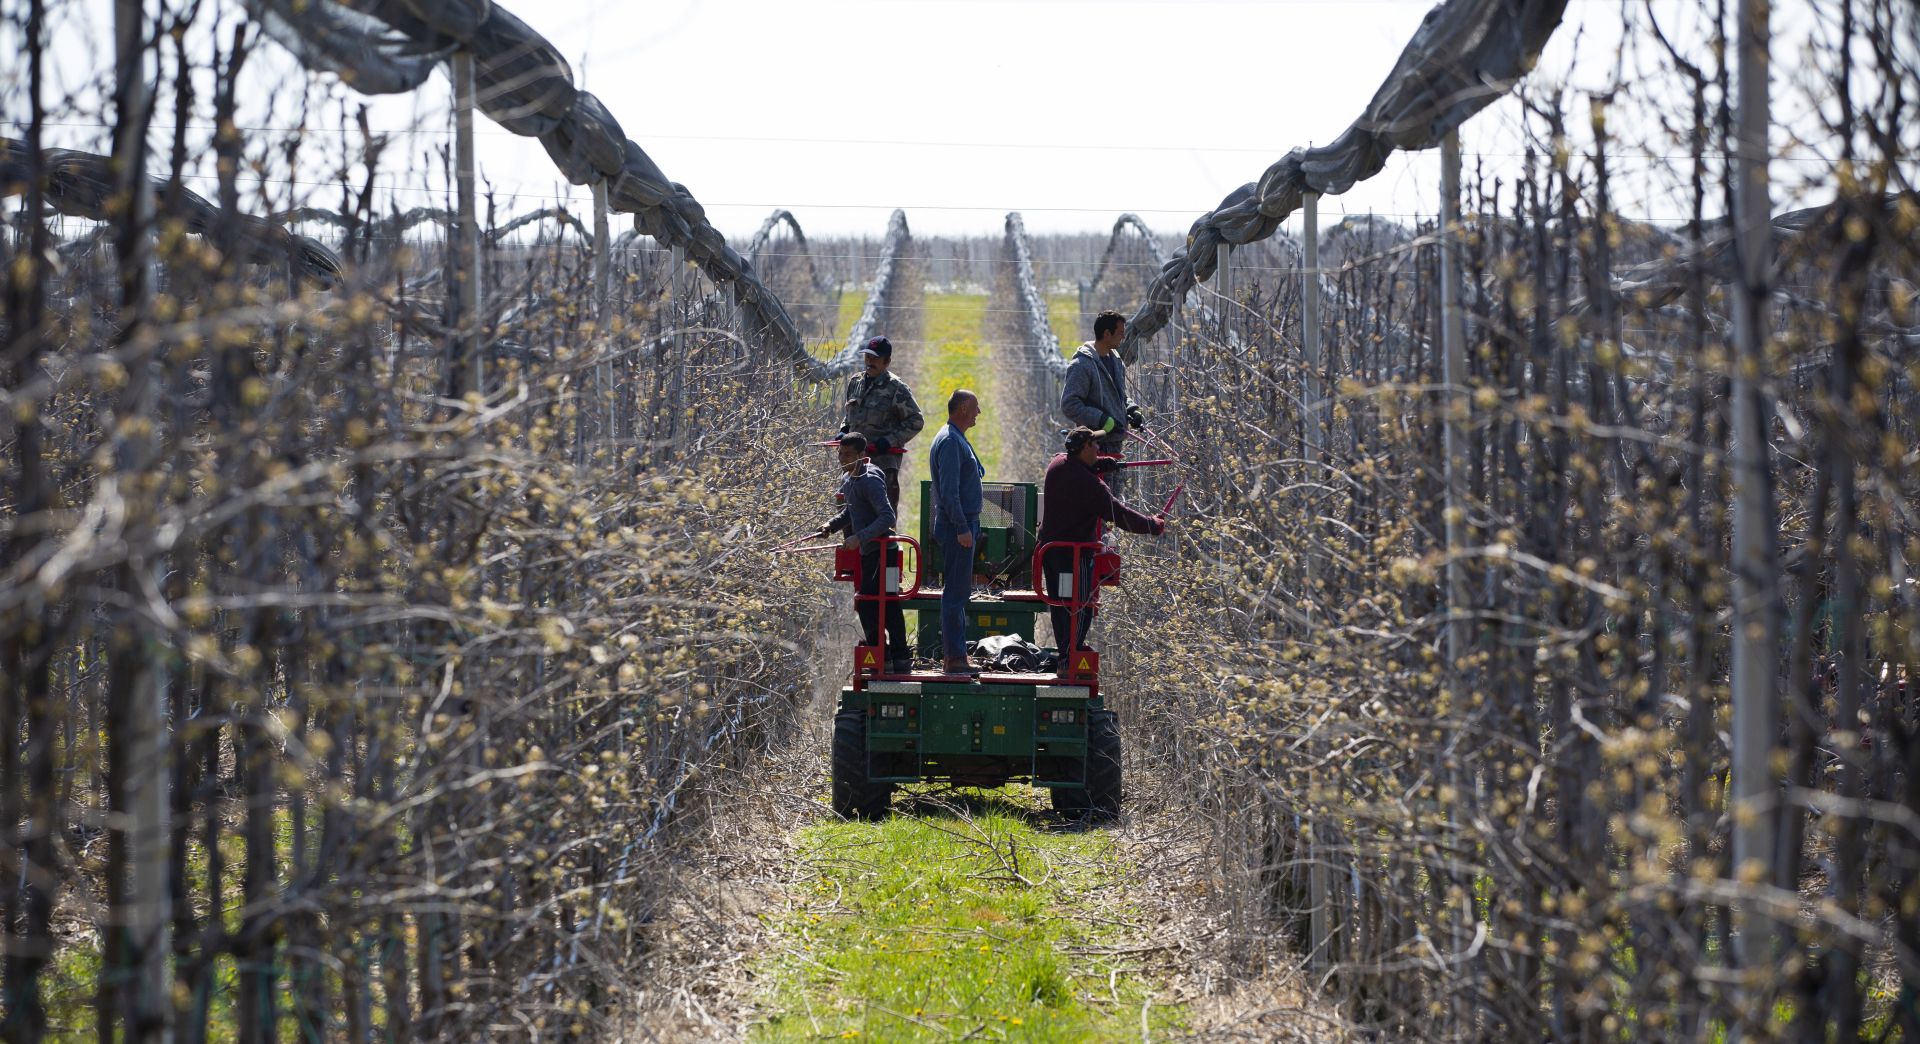 epa08346128 An image taken by a drone shows workers pruning pear trees from a specialised tractor in a fruit orchard near Kisrecse, Hungary, 06 April 2020.  EPA/Gyorgy Varga HUNGARY OUT